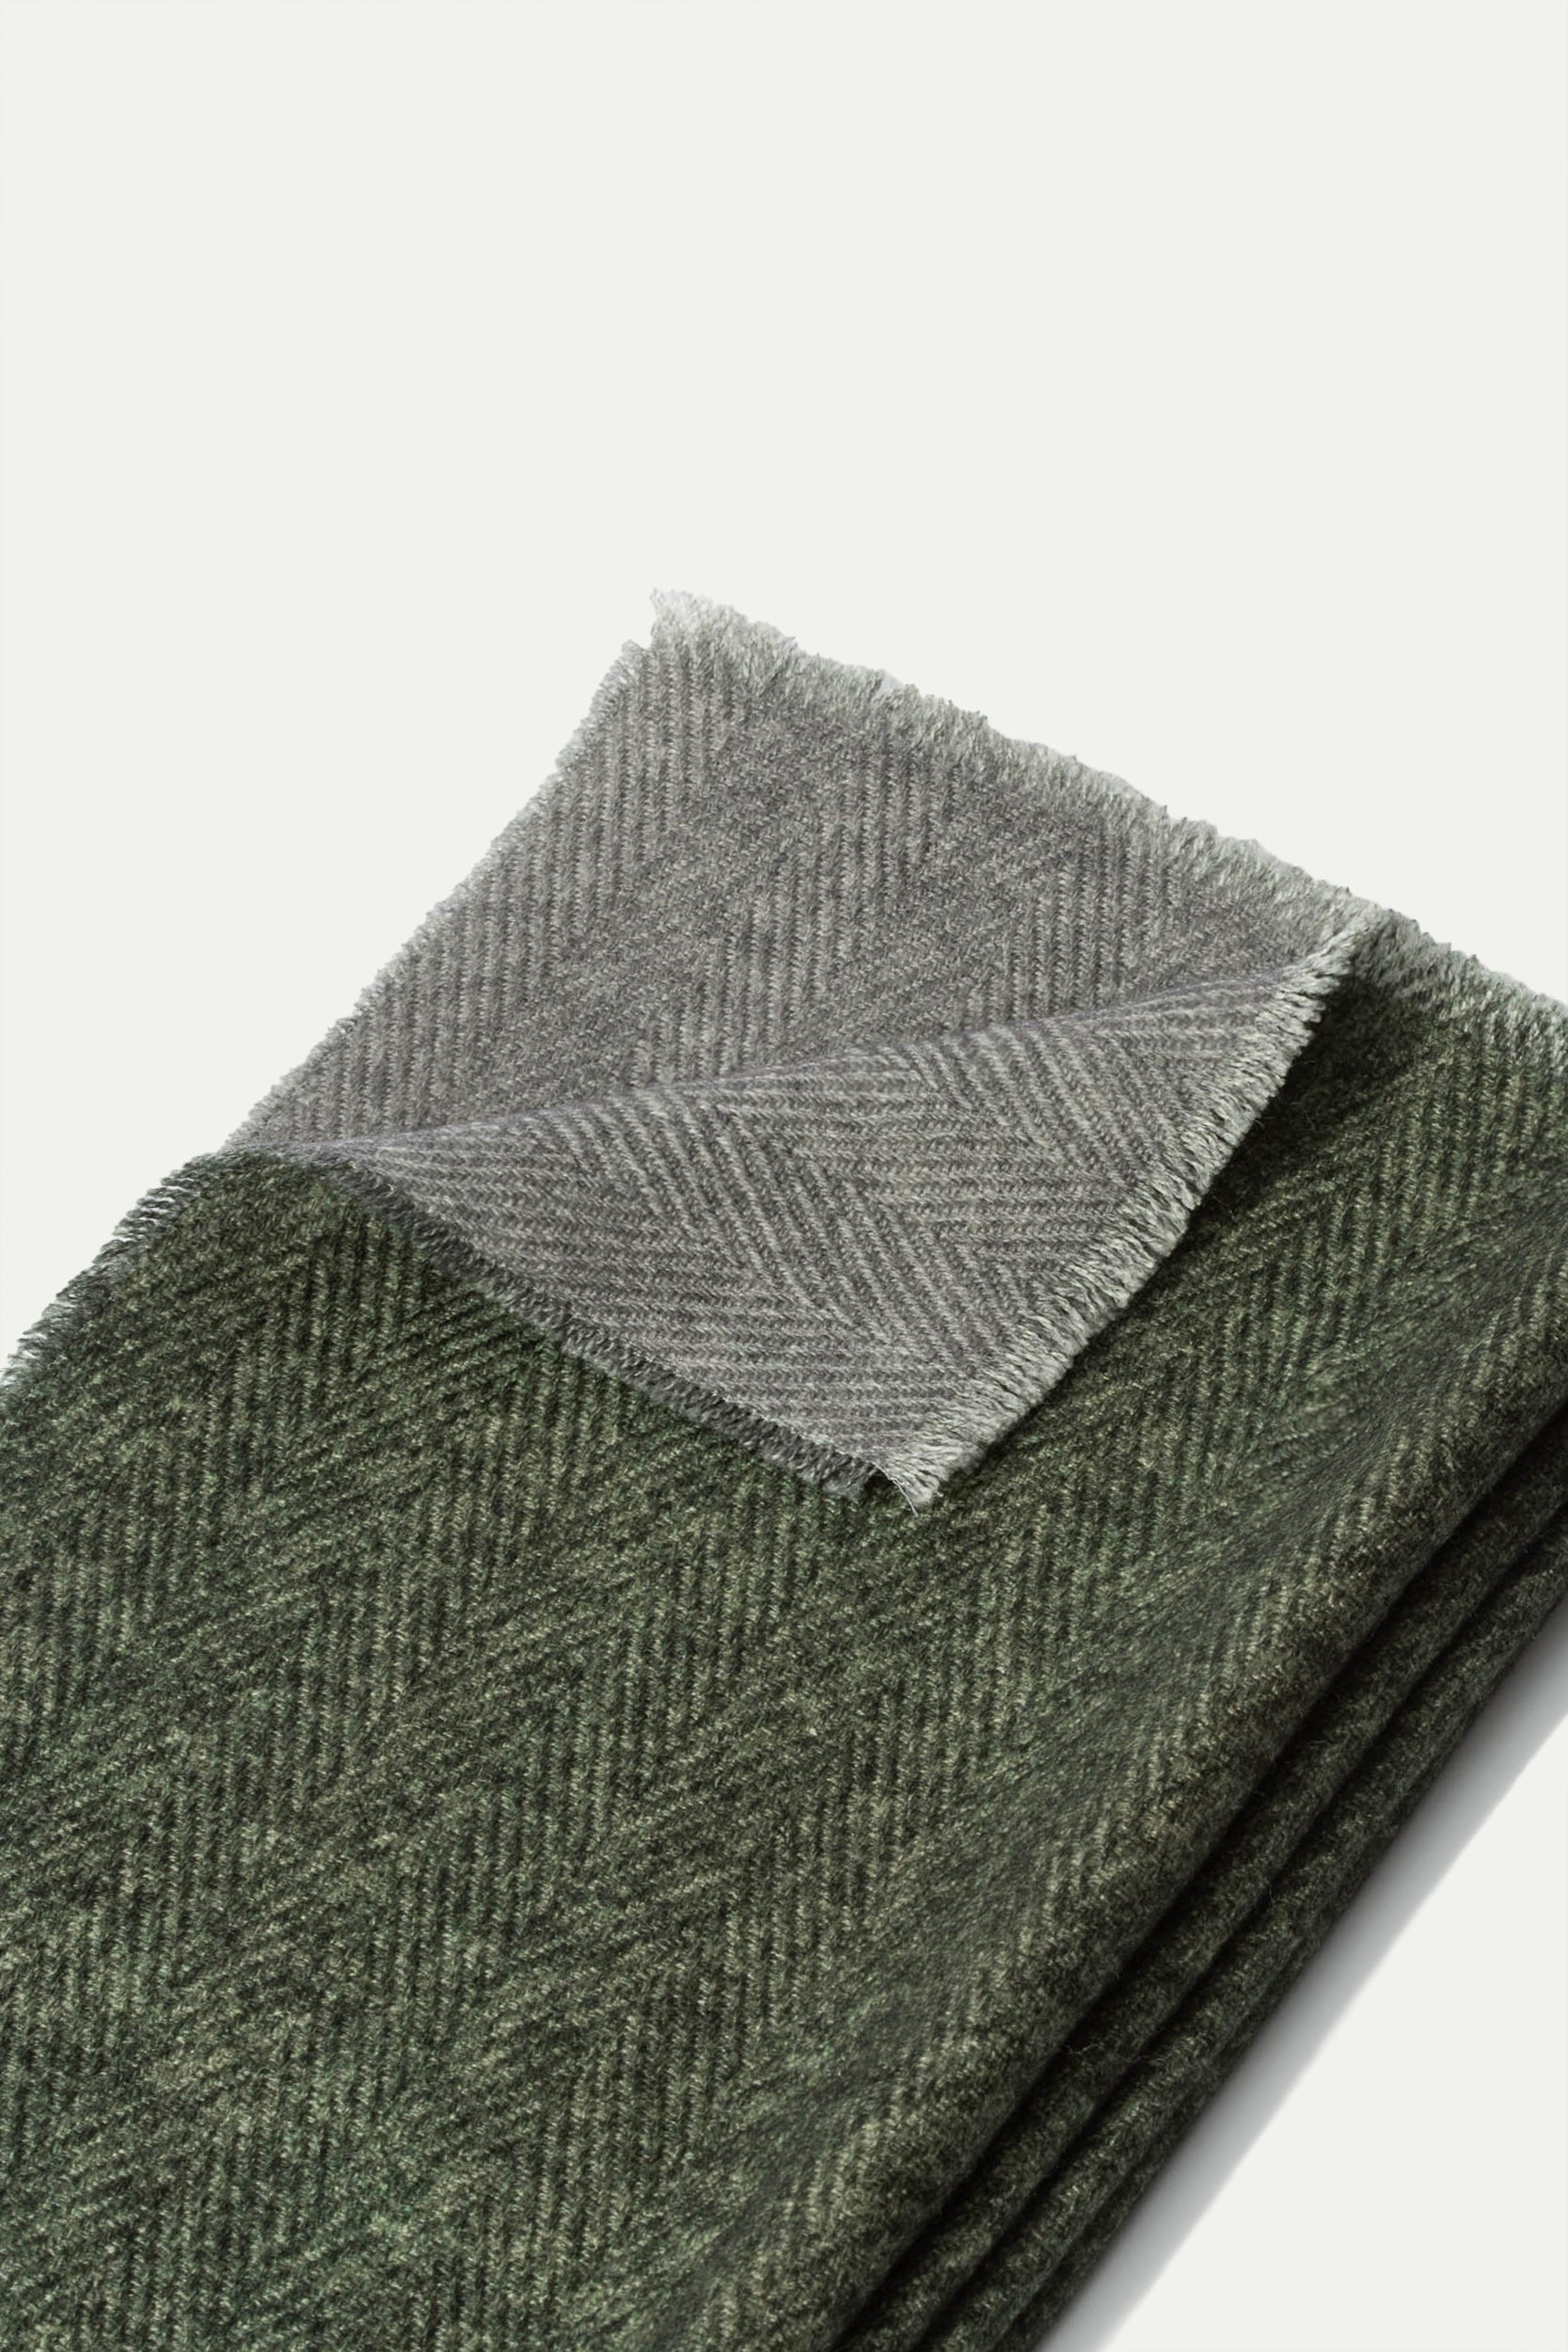 Grey and green reversible herringbone scarf - Made in Italy